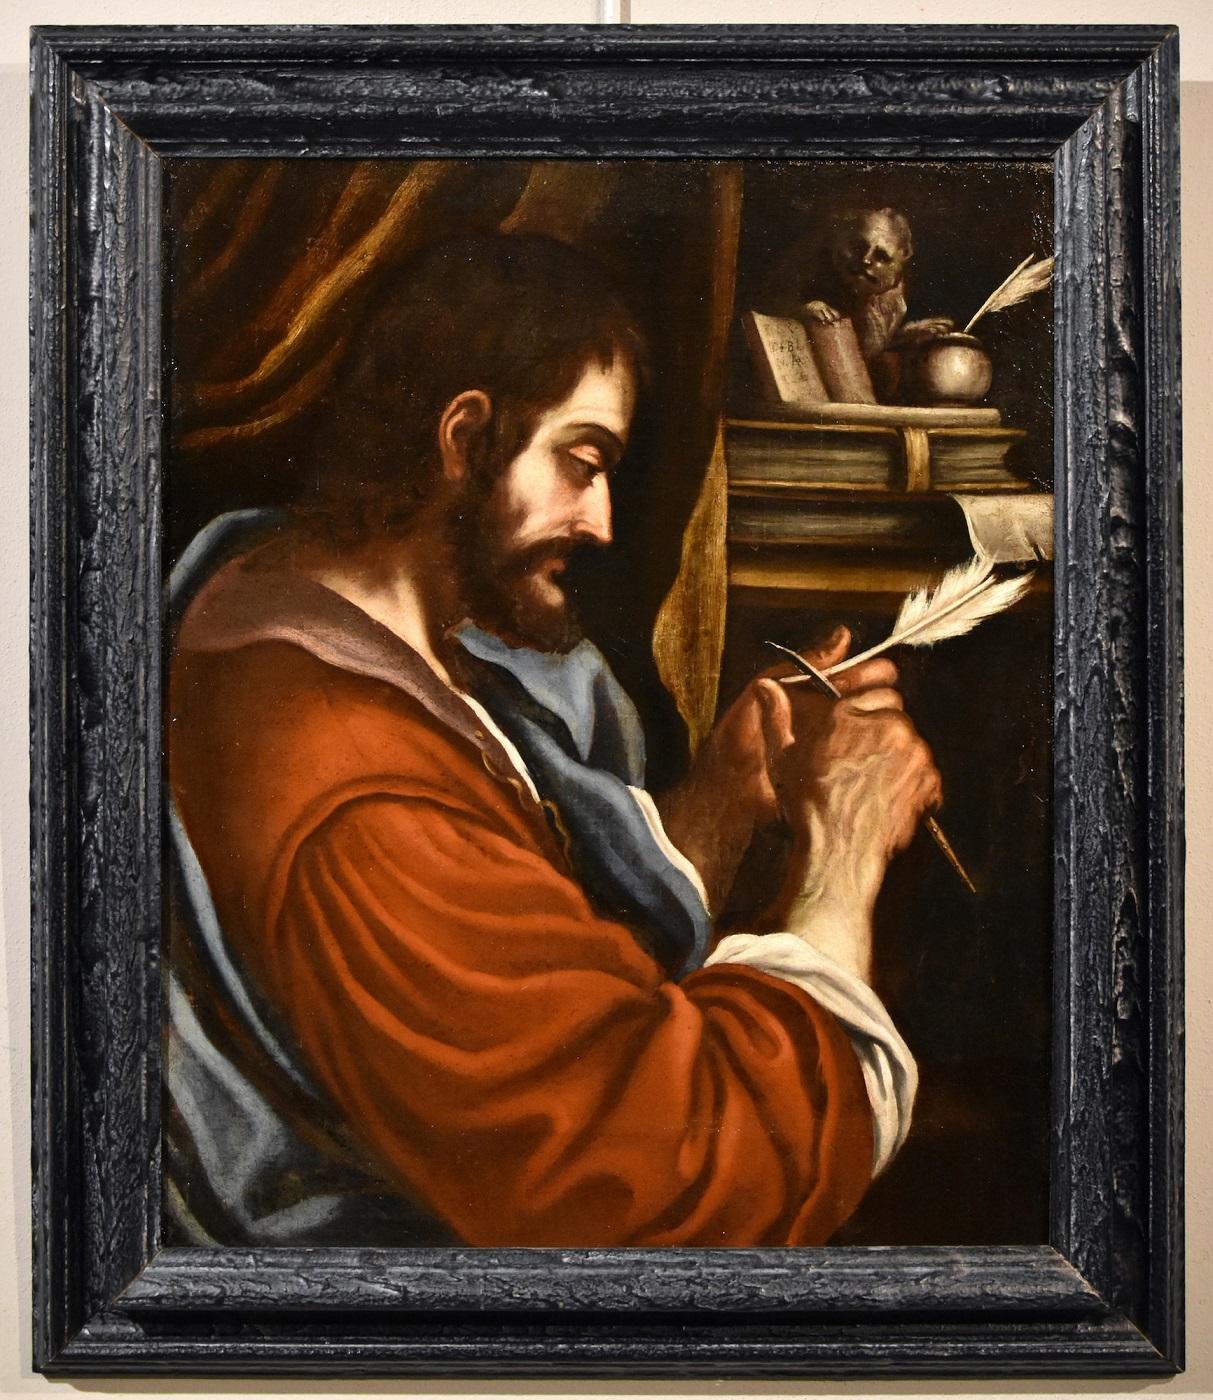 Saint Mark Evangelist Guercino Paint Oil on canvas Old master 17th Century Italy - Painting by Giovanni Francesco Barbieri, known as Il Guercino (Cento, 1591 - Bologna, 1666)